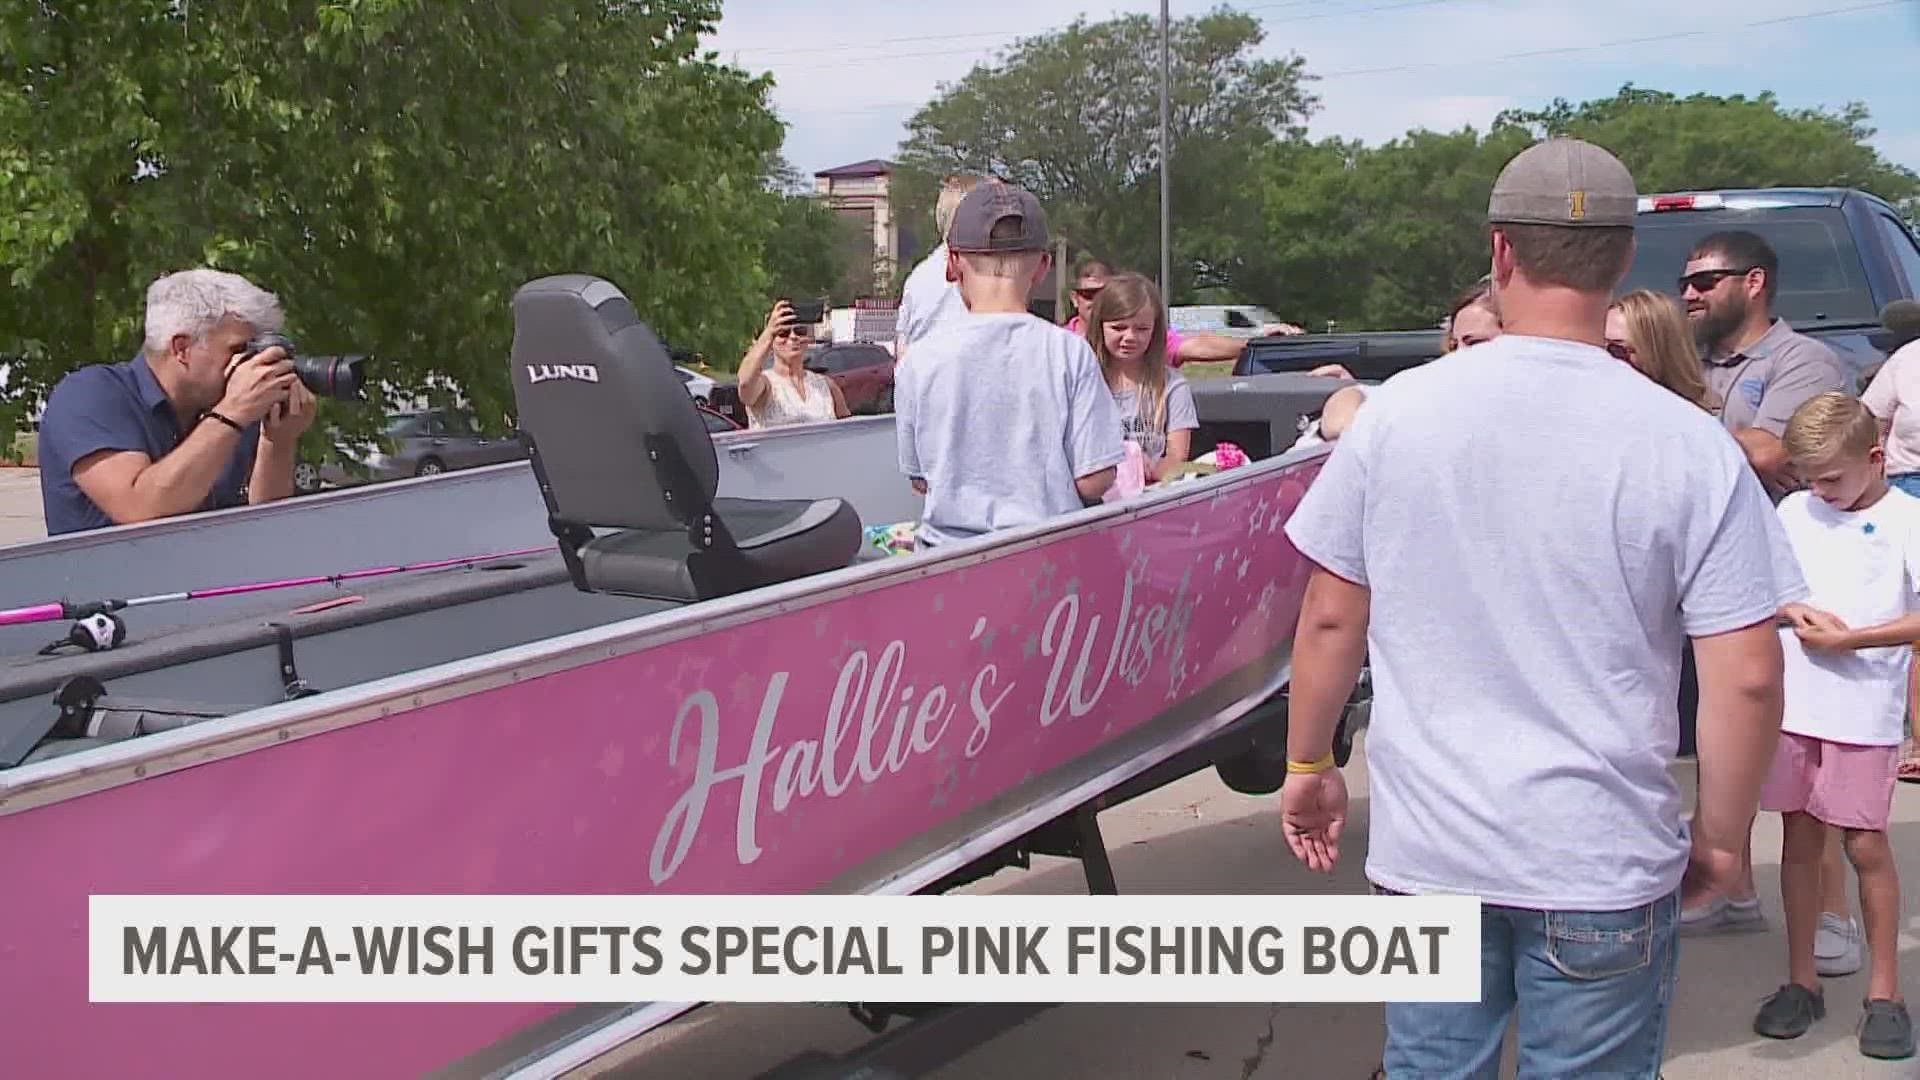 Hallie and her family take a fishing trip every August and now they can make lifelong memories together on her boat, decked out in her favorite color.